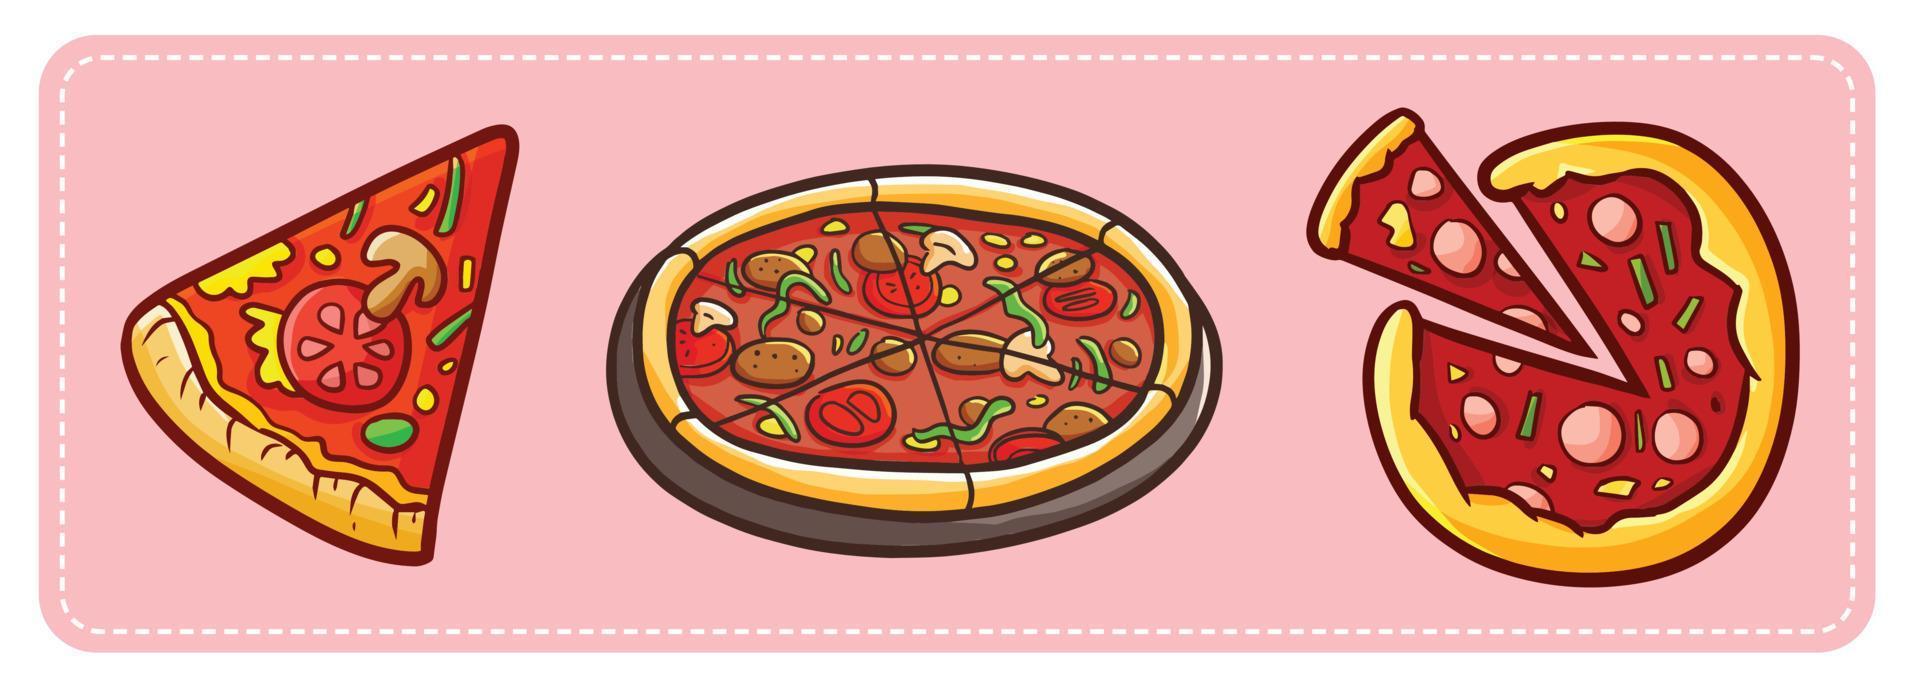 Pizza set in funny cartoon style vector